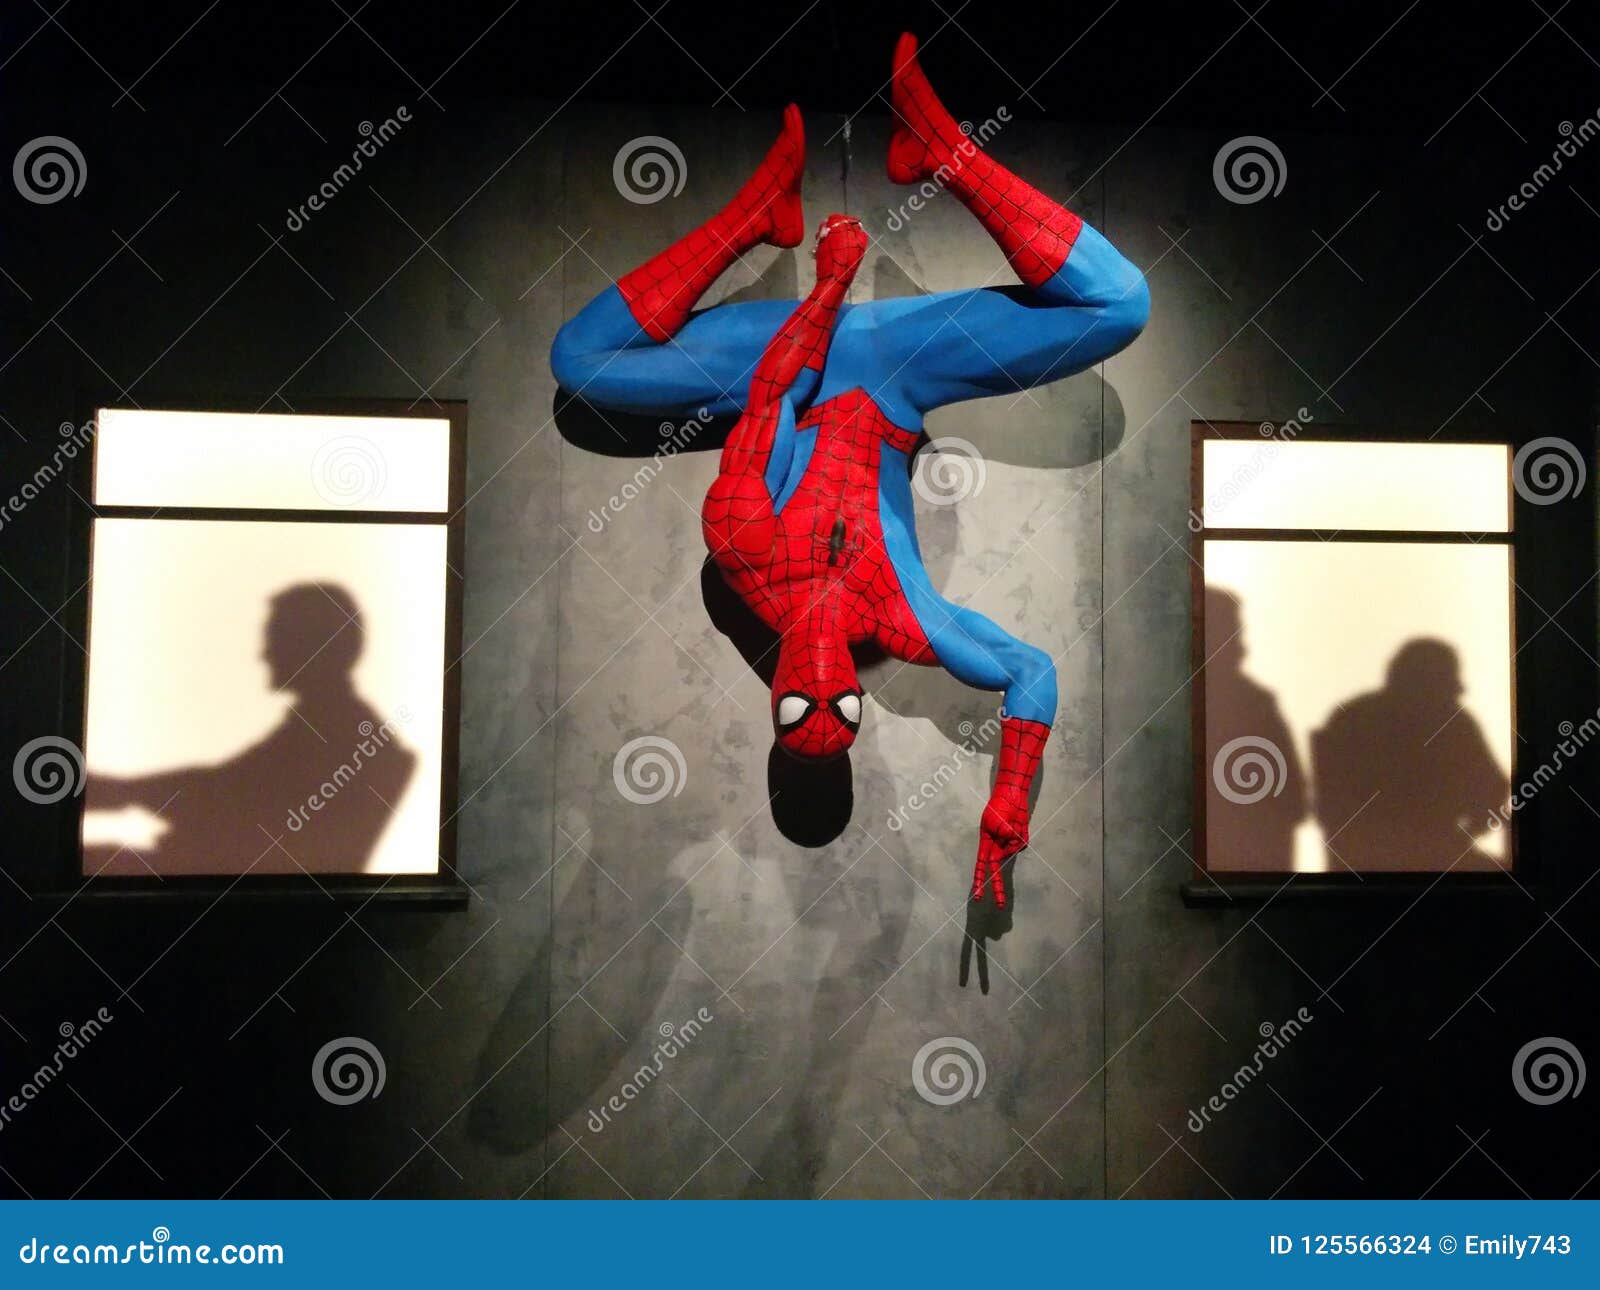 Spider-Man Hanging Upside Down At MoPOP Exhibit In Seattle Editorial Stock ...